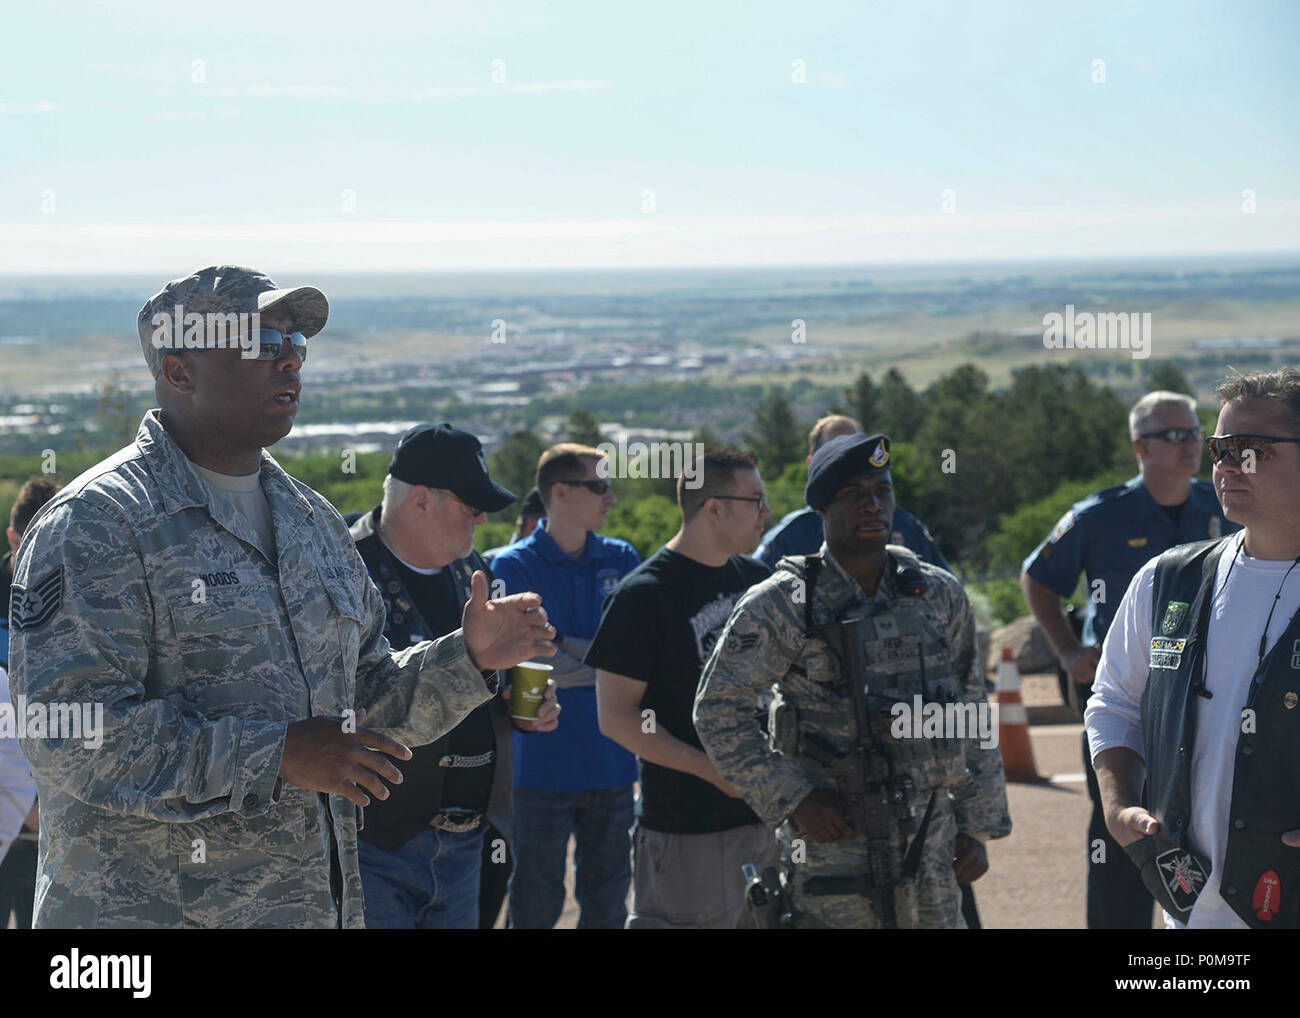 CHEYENNE MOUNTAIN AIR FORCE STATION, Colo.—Tech. Sgt. Wade H. Woods II, 21st Space Wing Non-Commissioned Officer In Charge of occupational safety, gives a safety brief before the Fallen Officers Memorial Motorcycle Ride, June 1, 2018 at Cheyenne Mountain Air Force Station, Colorado. The ride began in 2014 with only 12 riders. Four years and five rides years later, 137 riders attended to honor fallen military and civilian police officers. (U.S. Air Force photo by Staff Sgt. Emily Kenney) Stock Photo